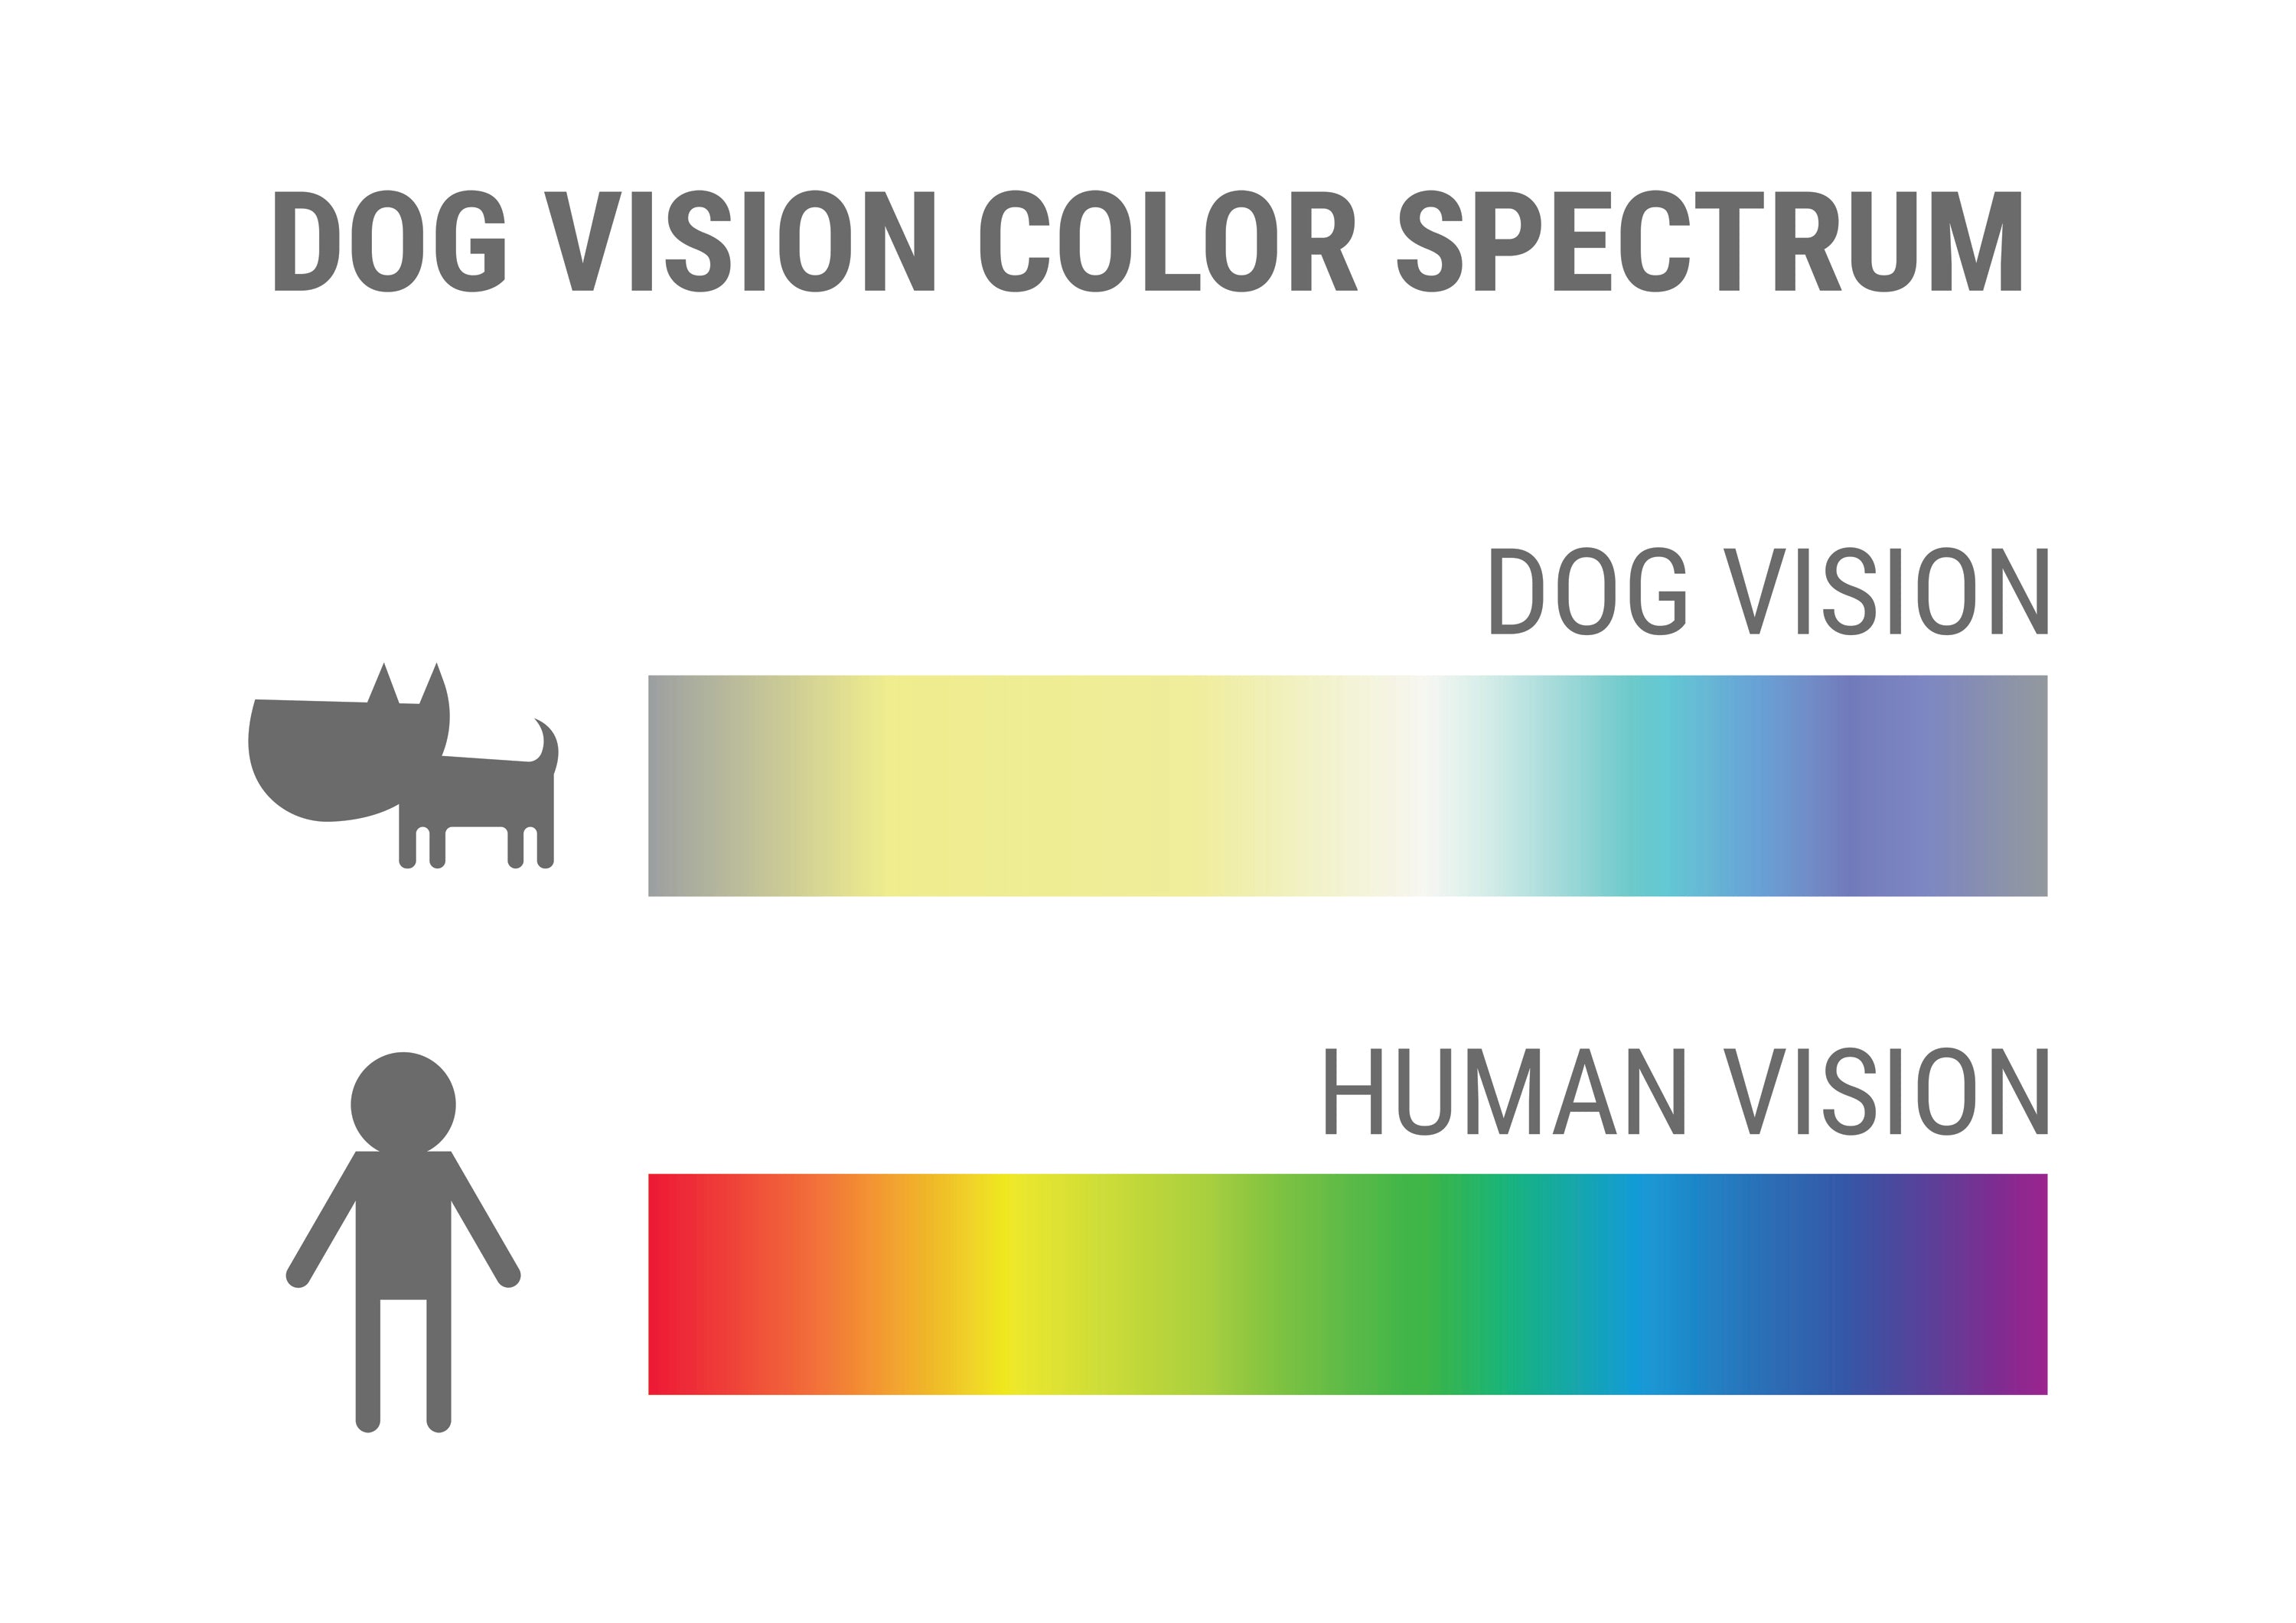 A chart of a dog vs human color vision spectrum